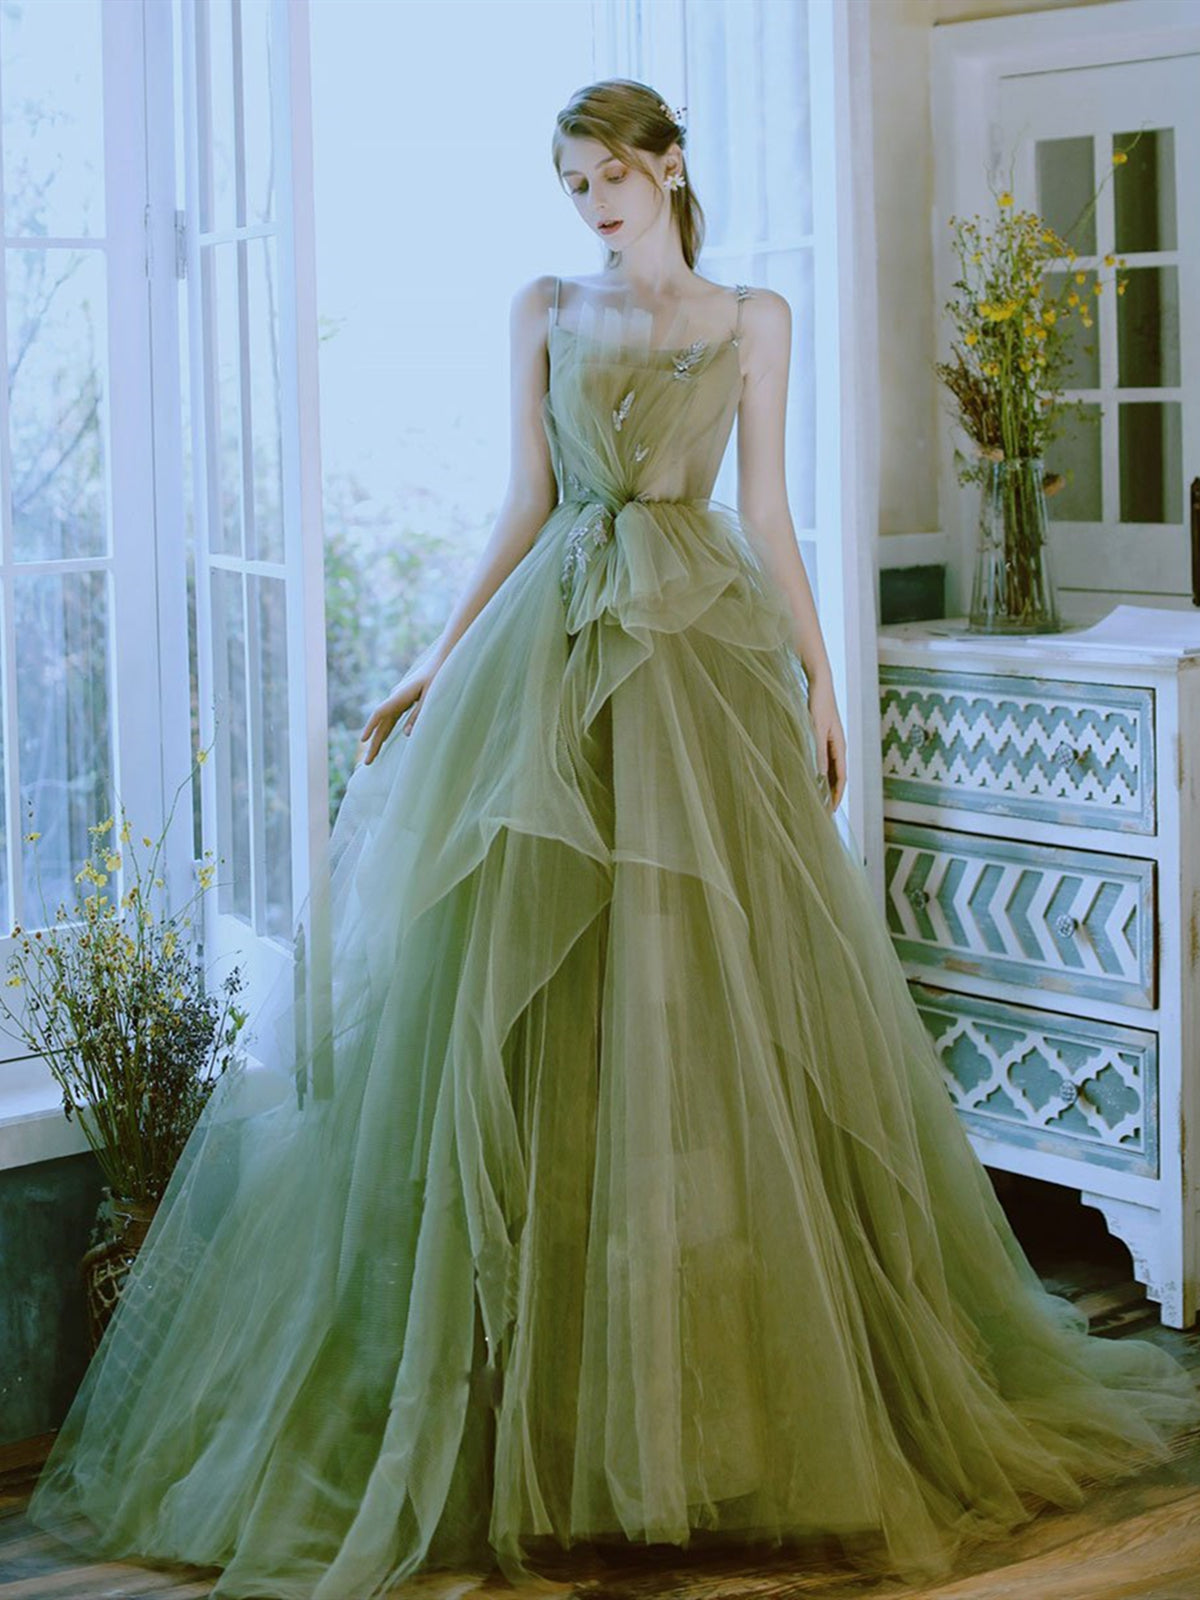 Dark Green Tulle Puffy Ball Gown Green Tulle Prom Dress With Flare Low Back  Formal Wear From Weddingfactory, $165.83